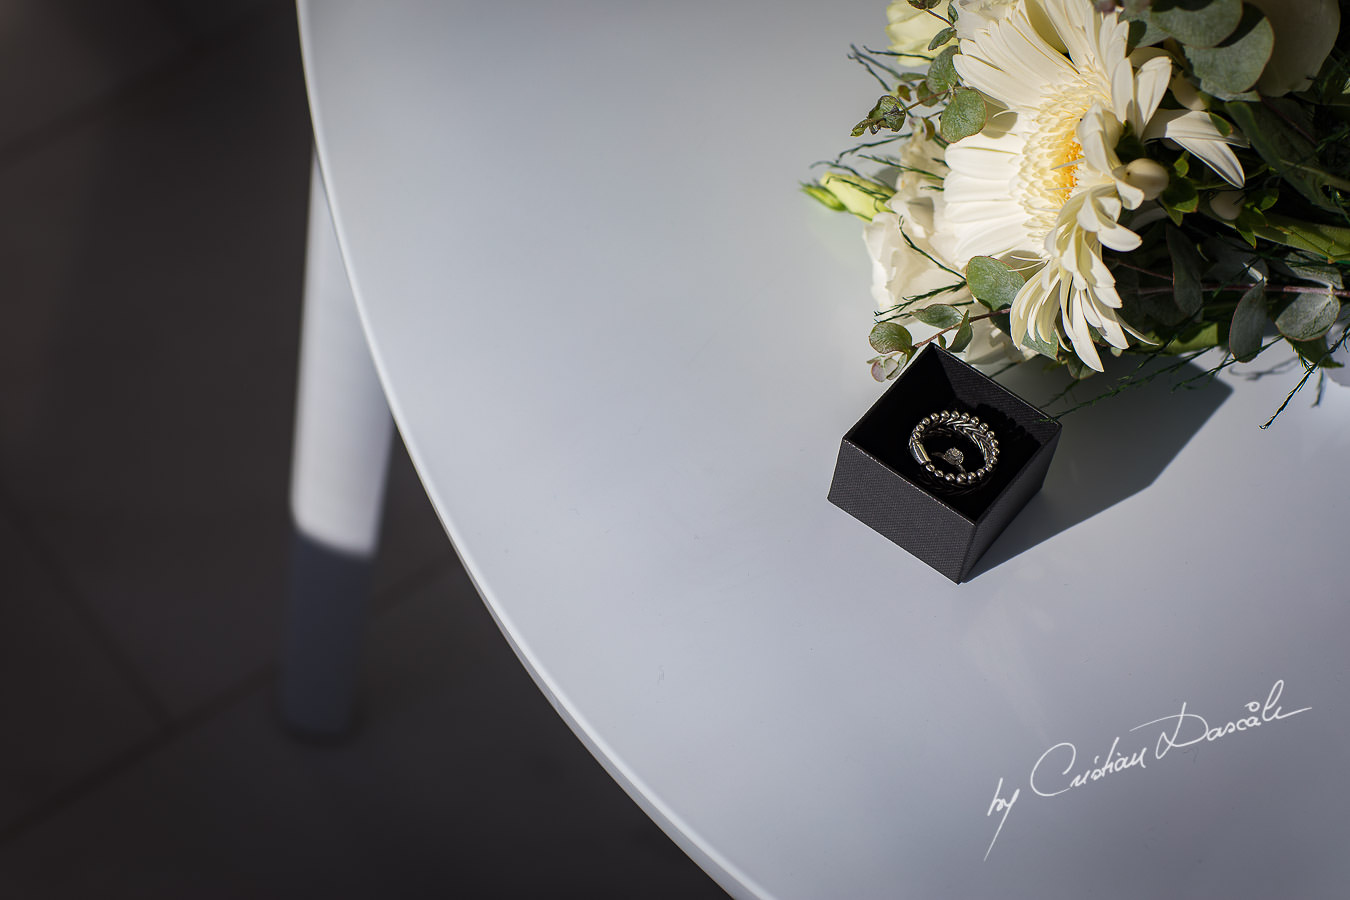 Wedding rings photographed by Cyprus Photographer Cristian Dascalu during a beautiful wedding at Cap St. George in Paphos.